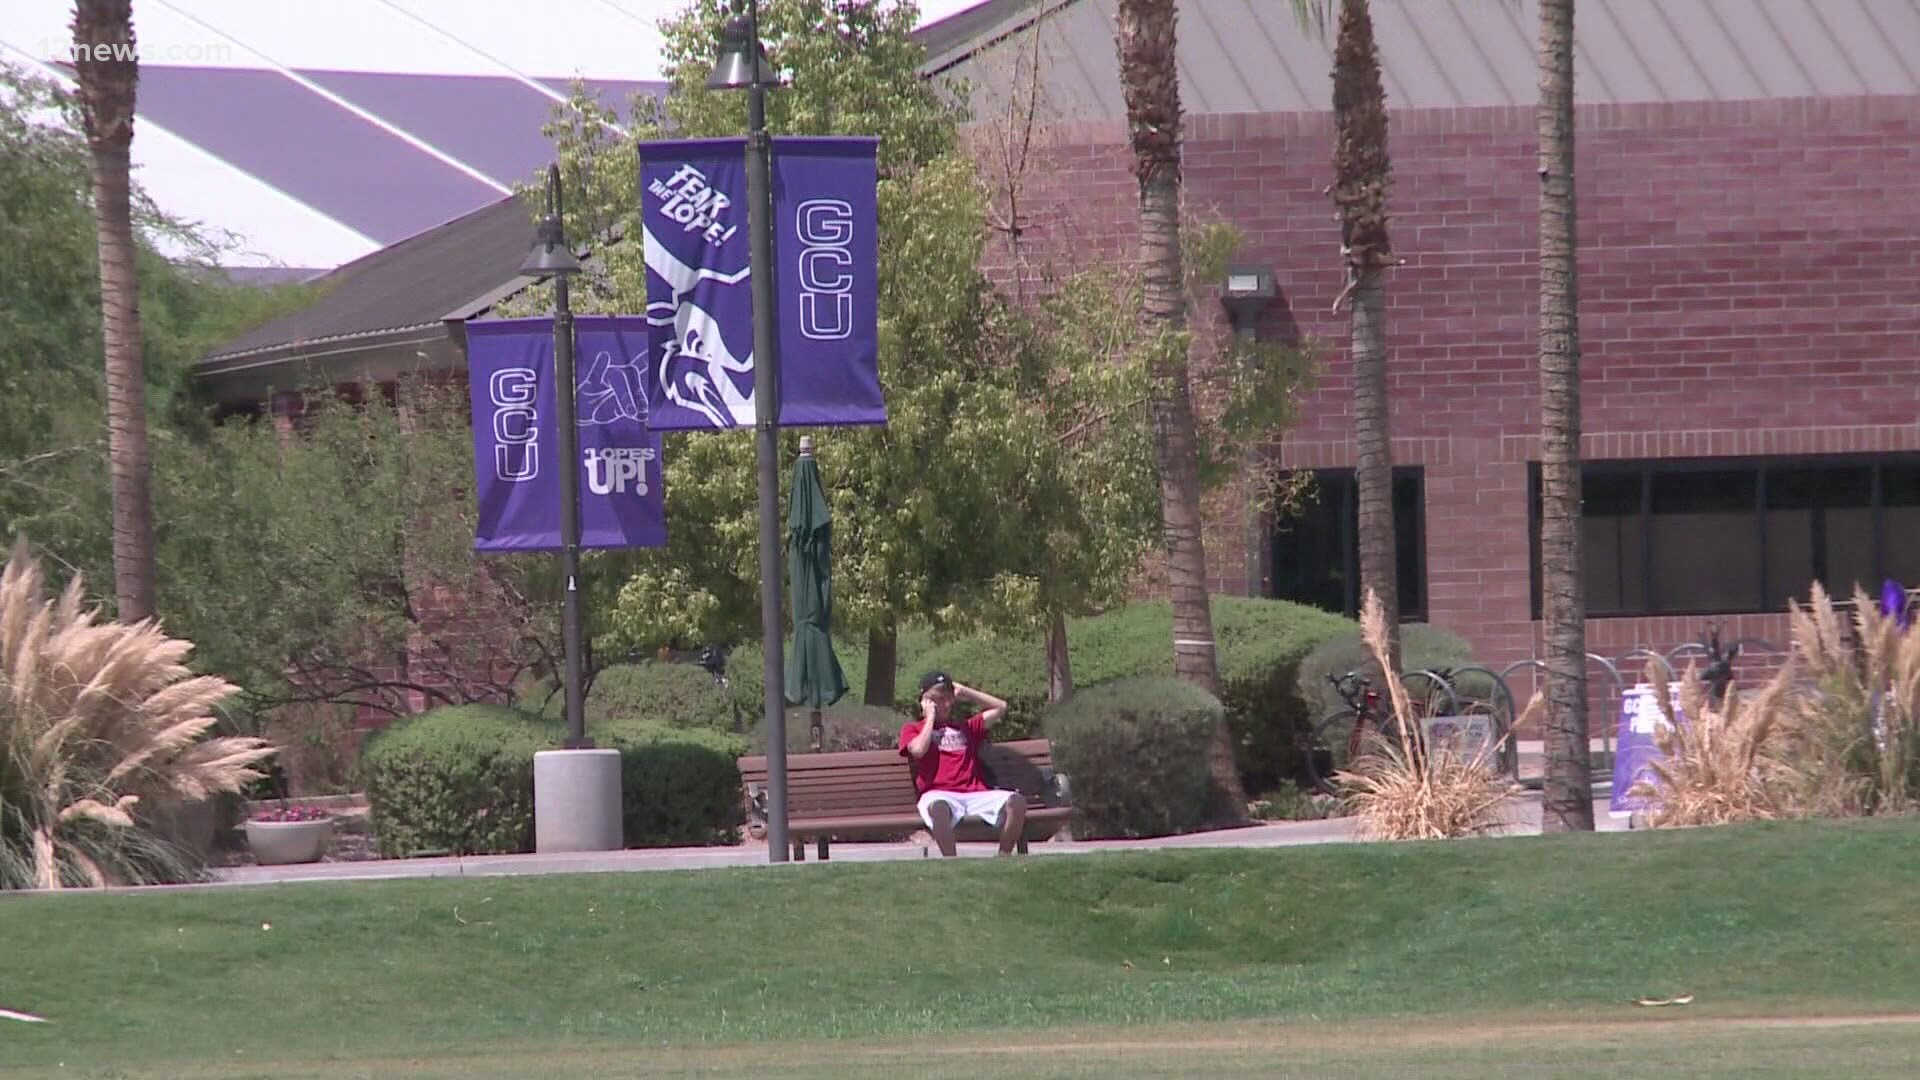 Grand Canyon University is opening a COVID-19 vaccination site this week. Team 12's Matt Yurus has the latest.